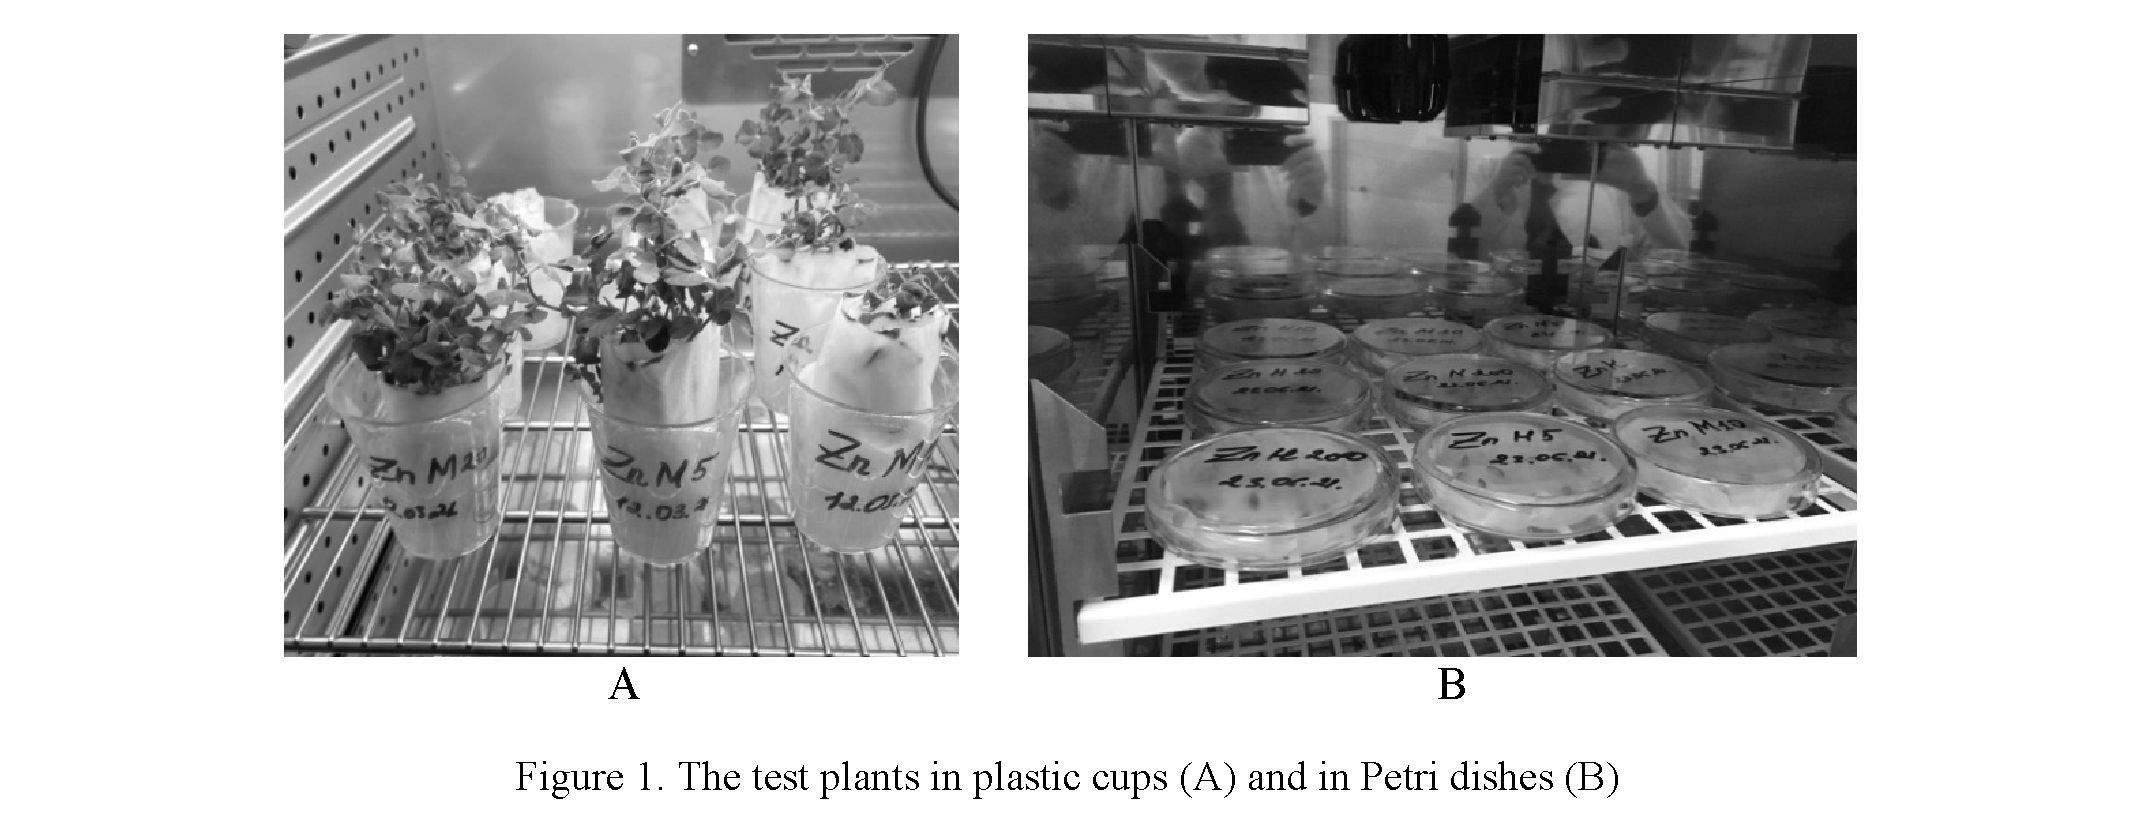 Influence of zinc nanoparticles on the development of sprouts of Avena sativa and Pisum sativum plants